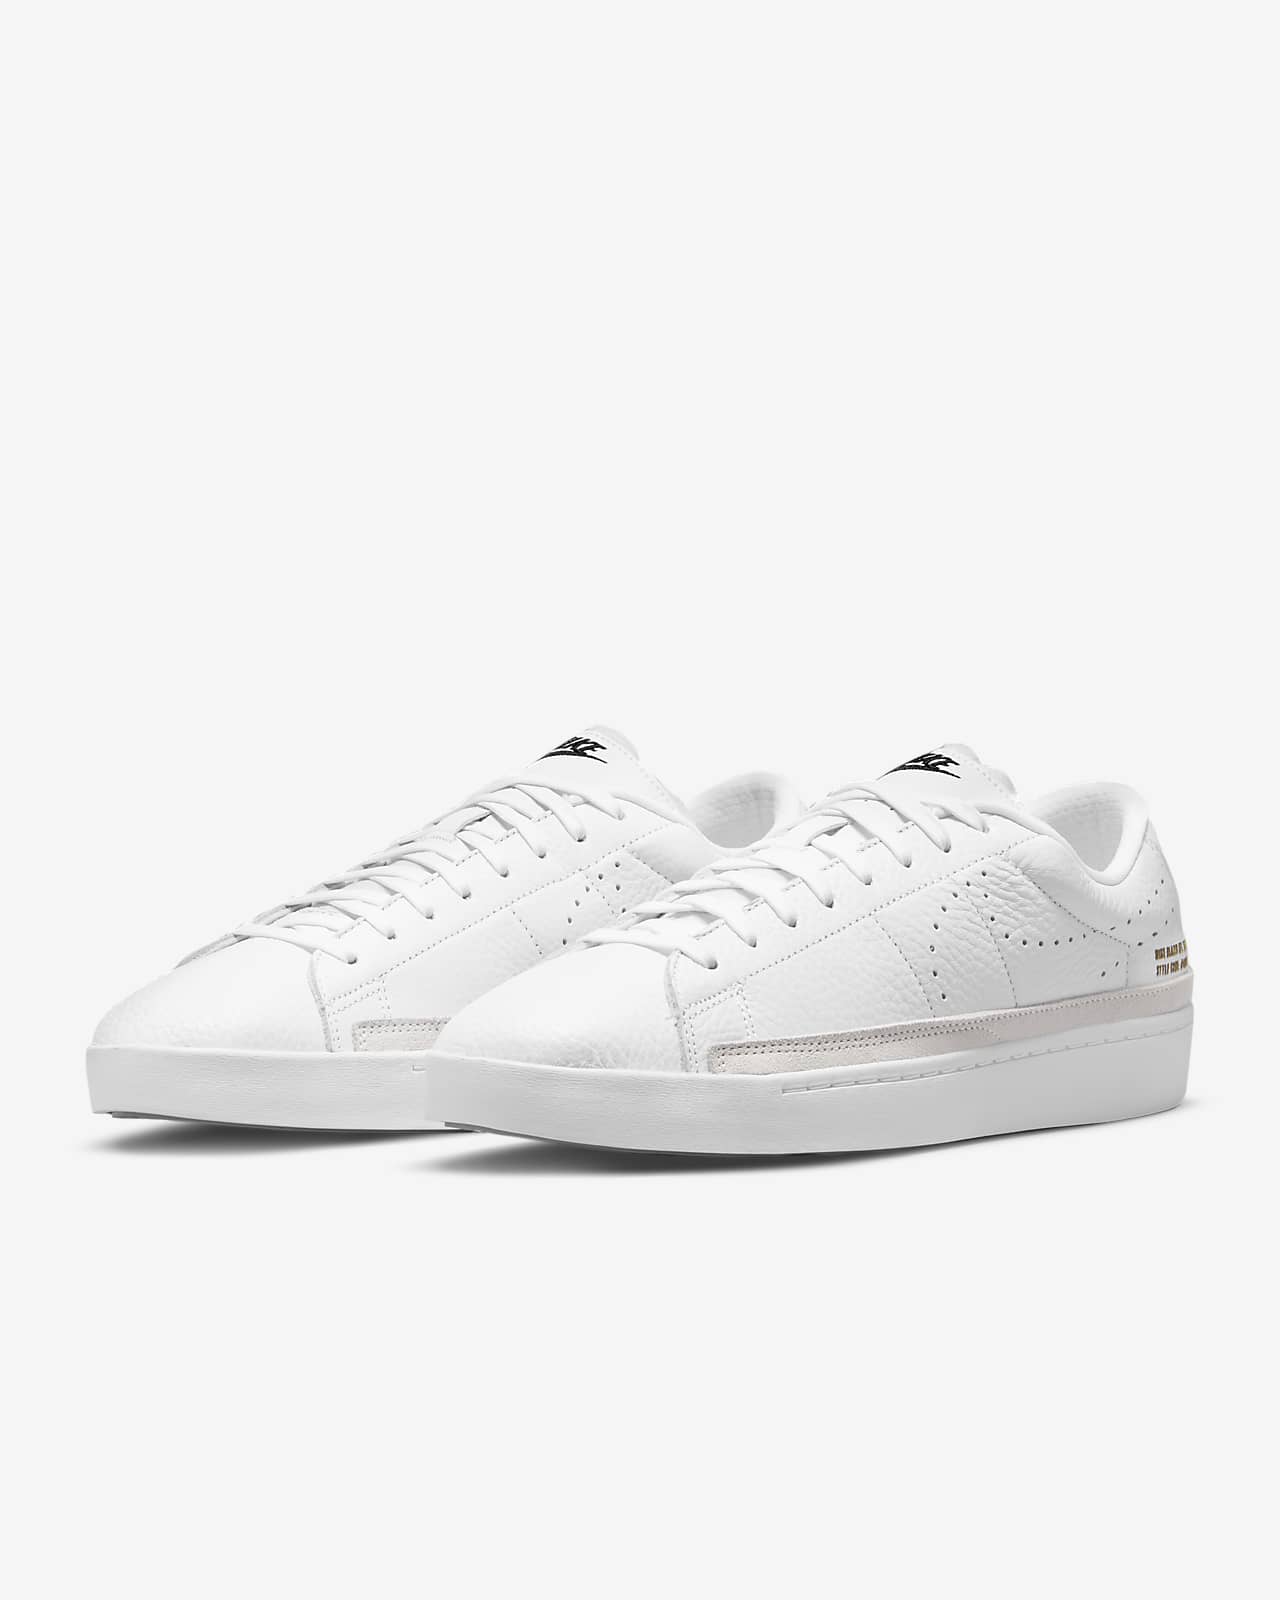 Chaussure Nike Blazer Low X pour Homme